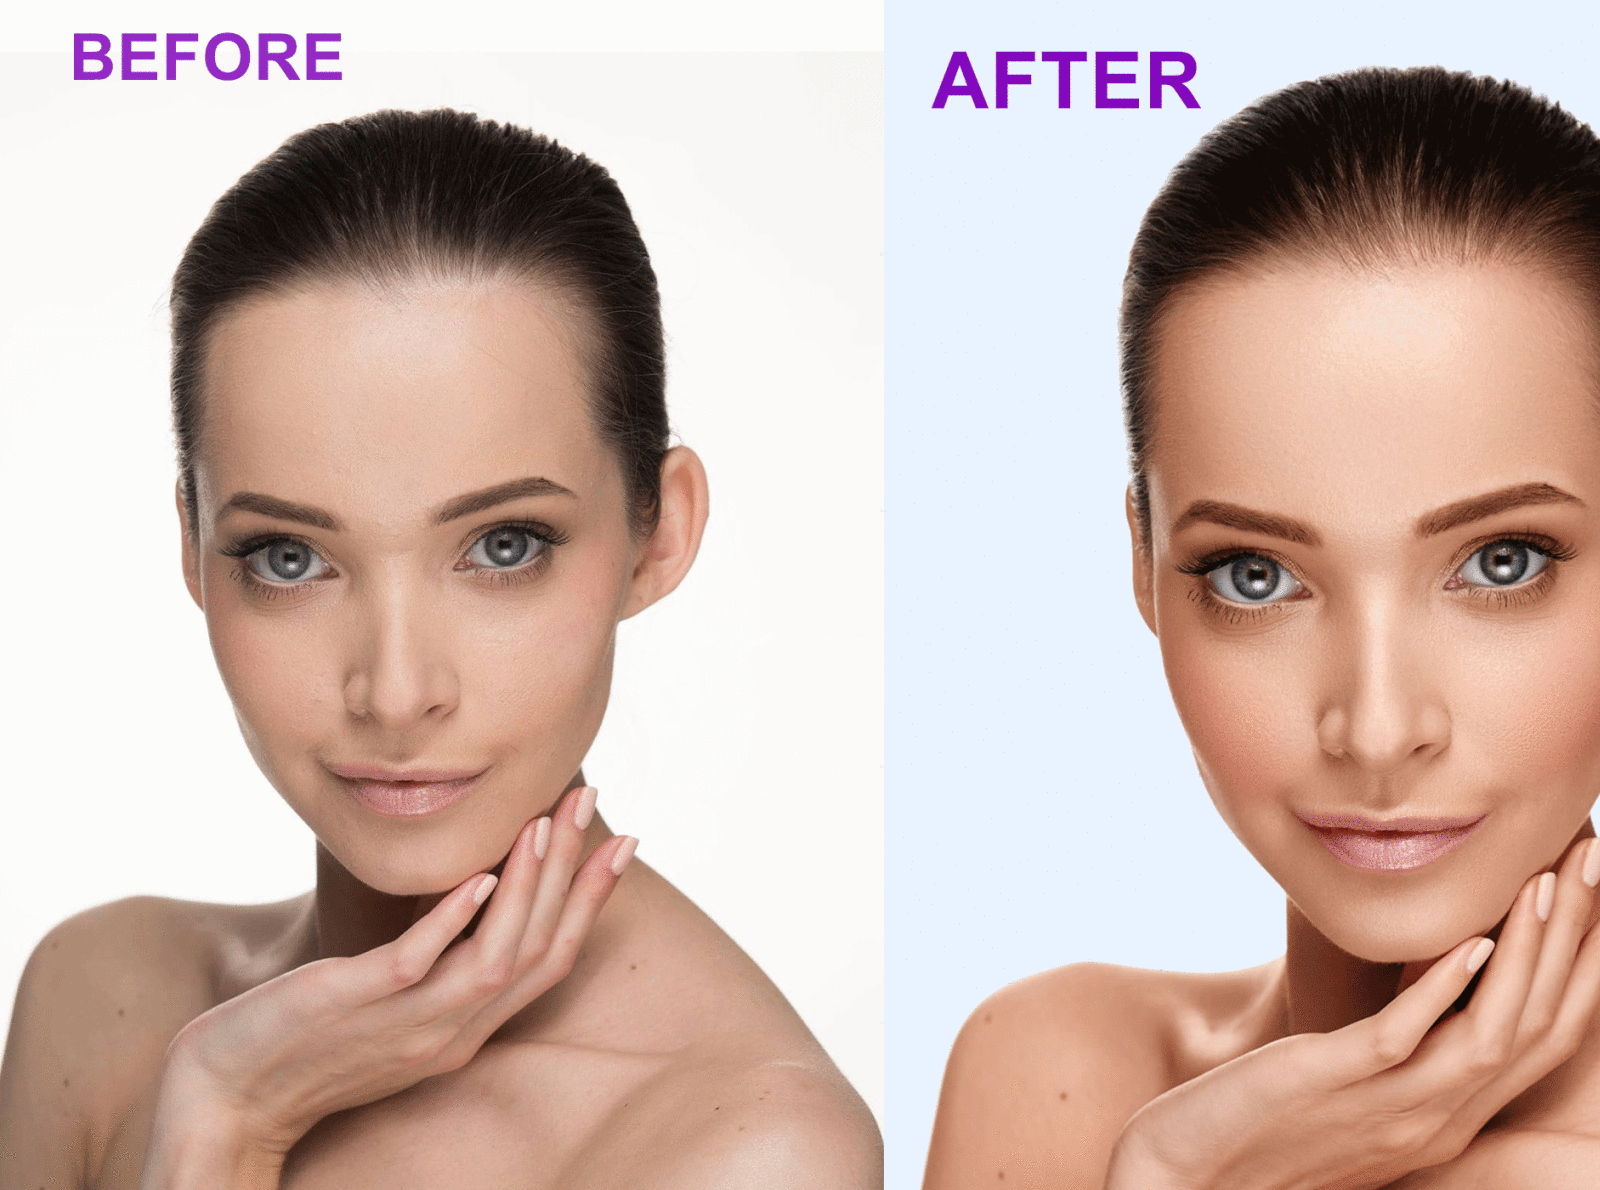 Retouching services professionally